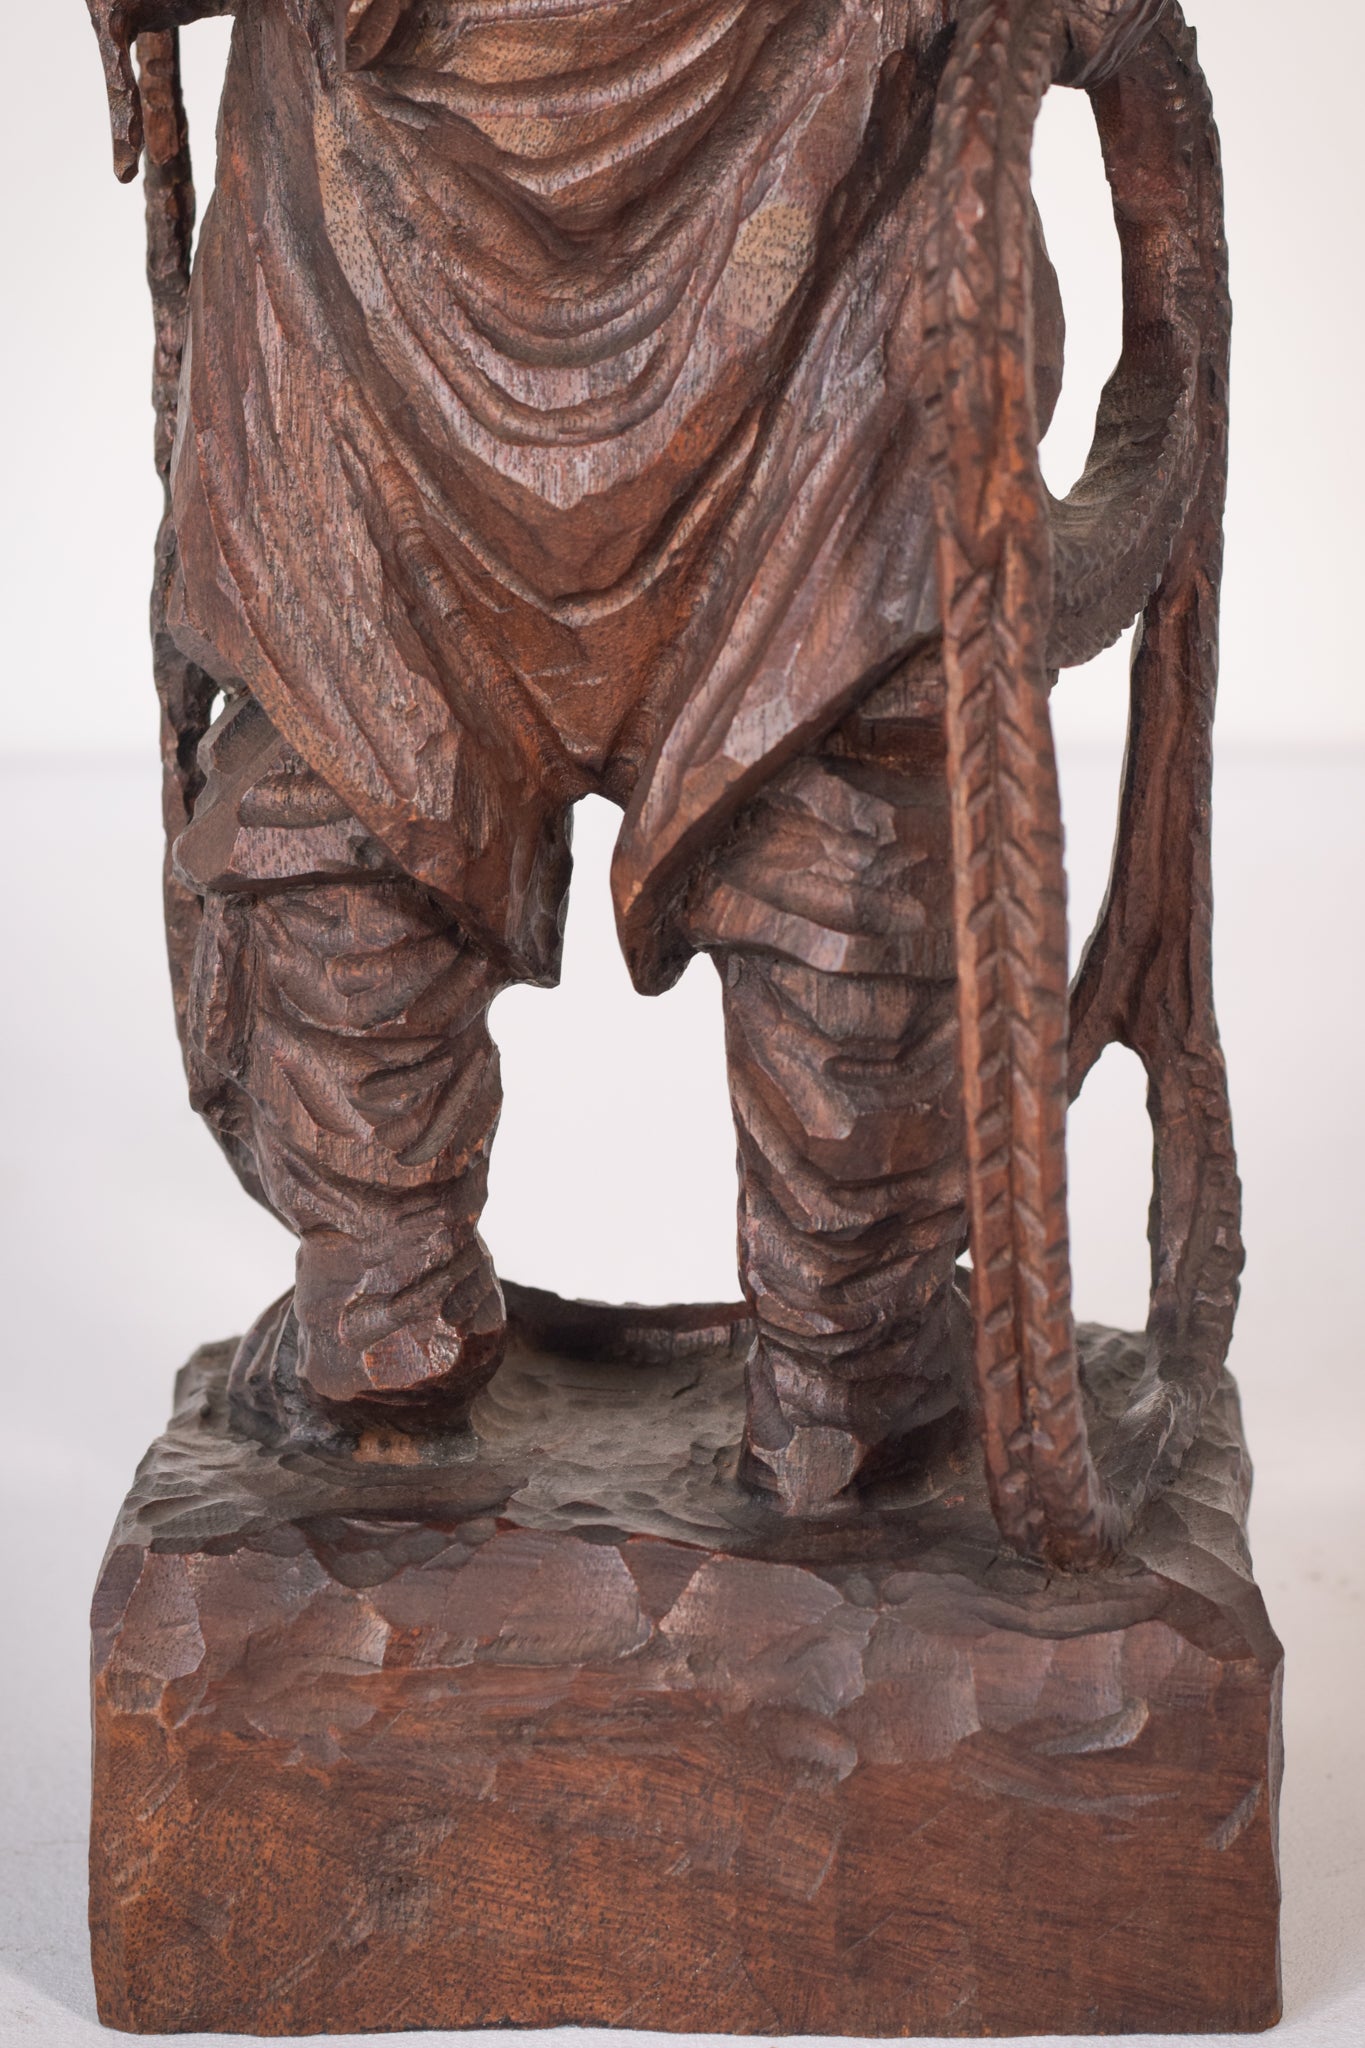 Hand Carved Wooden Sculpture of a Male Figure